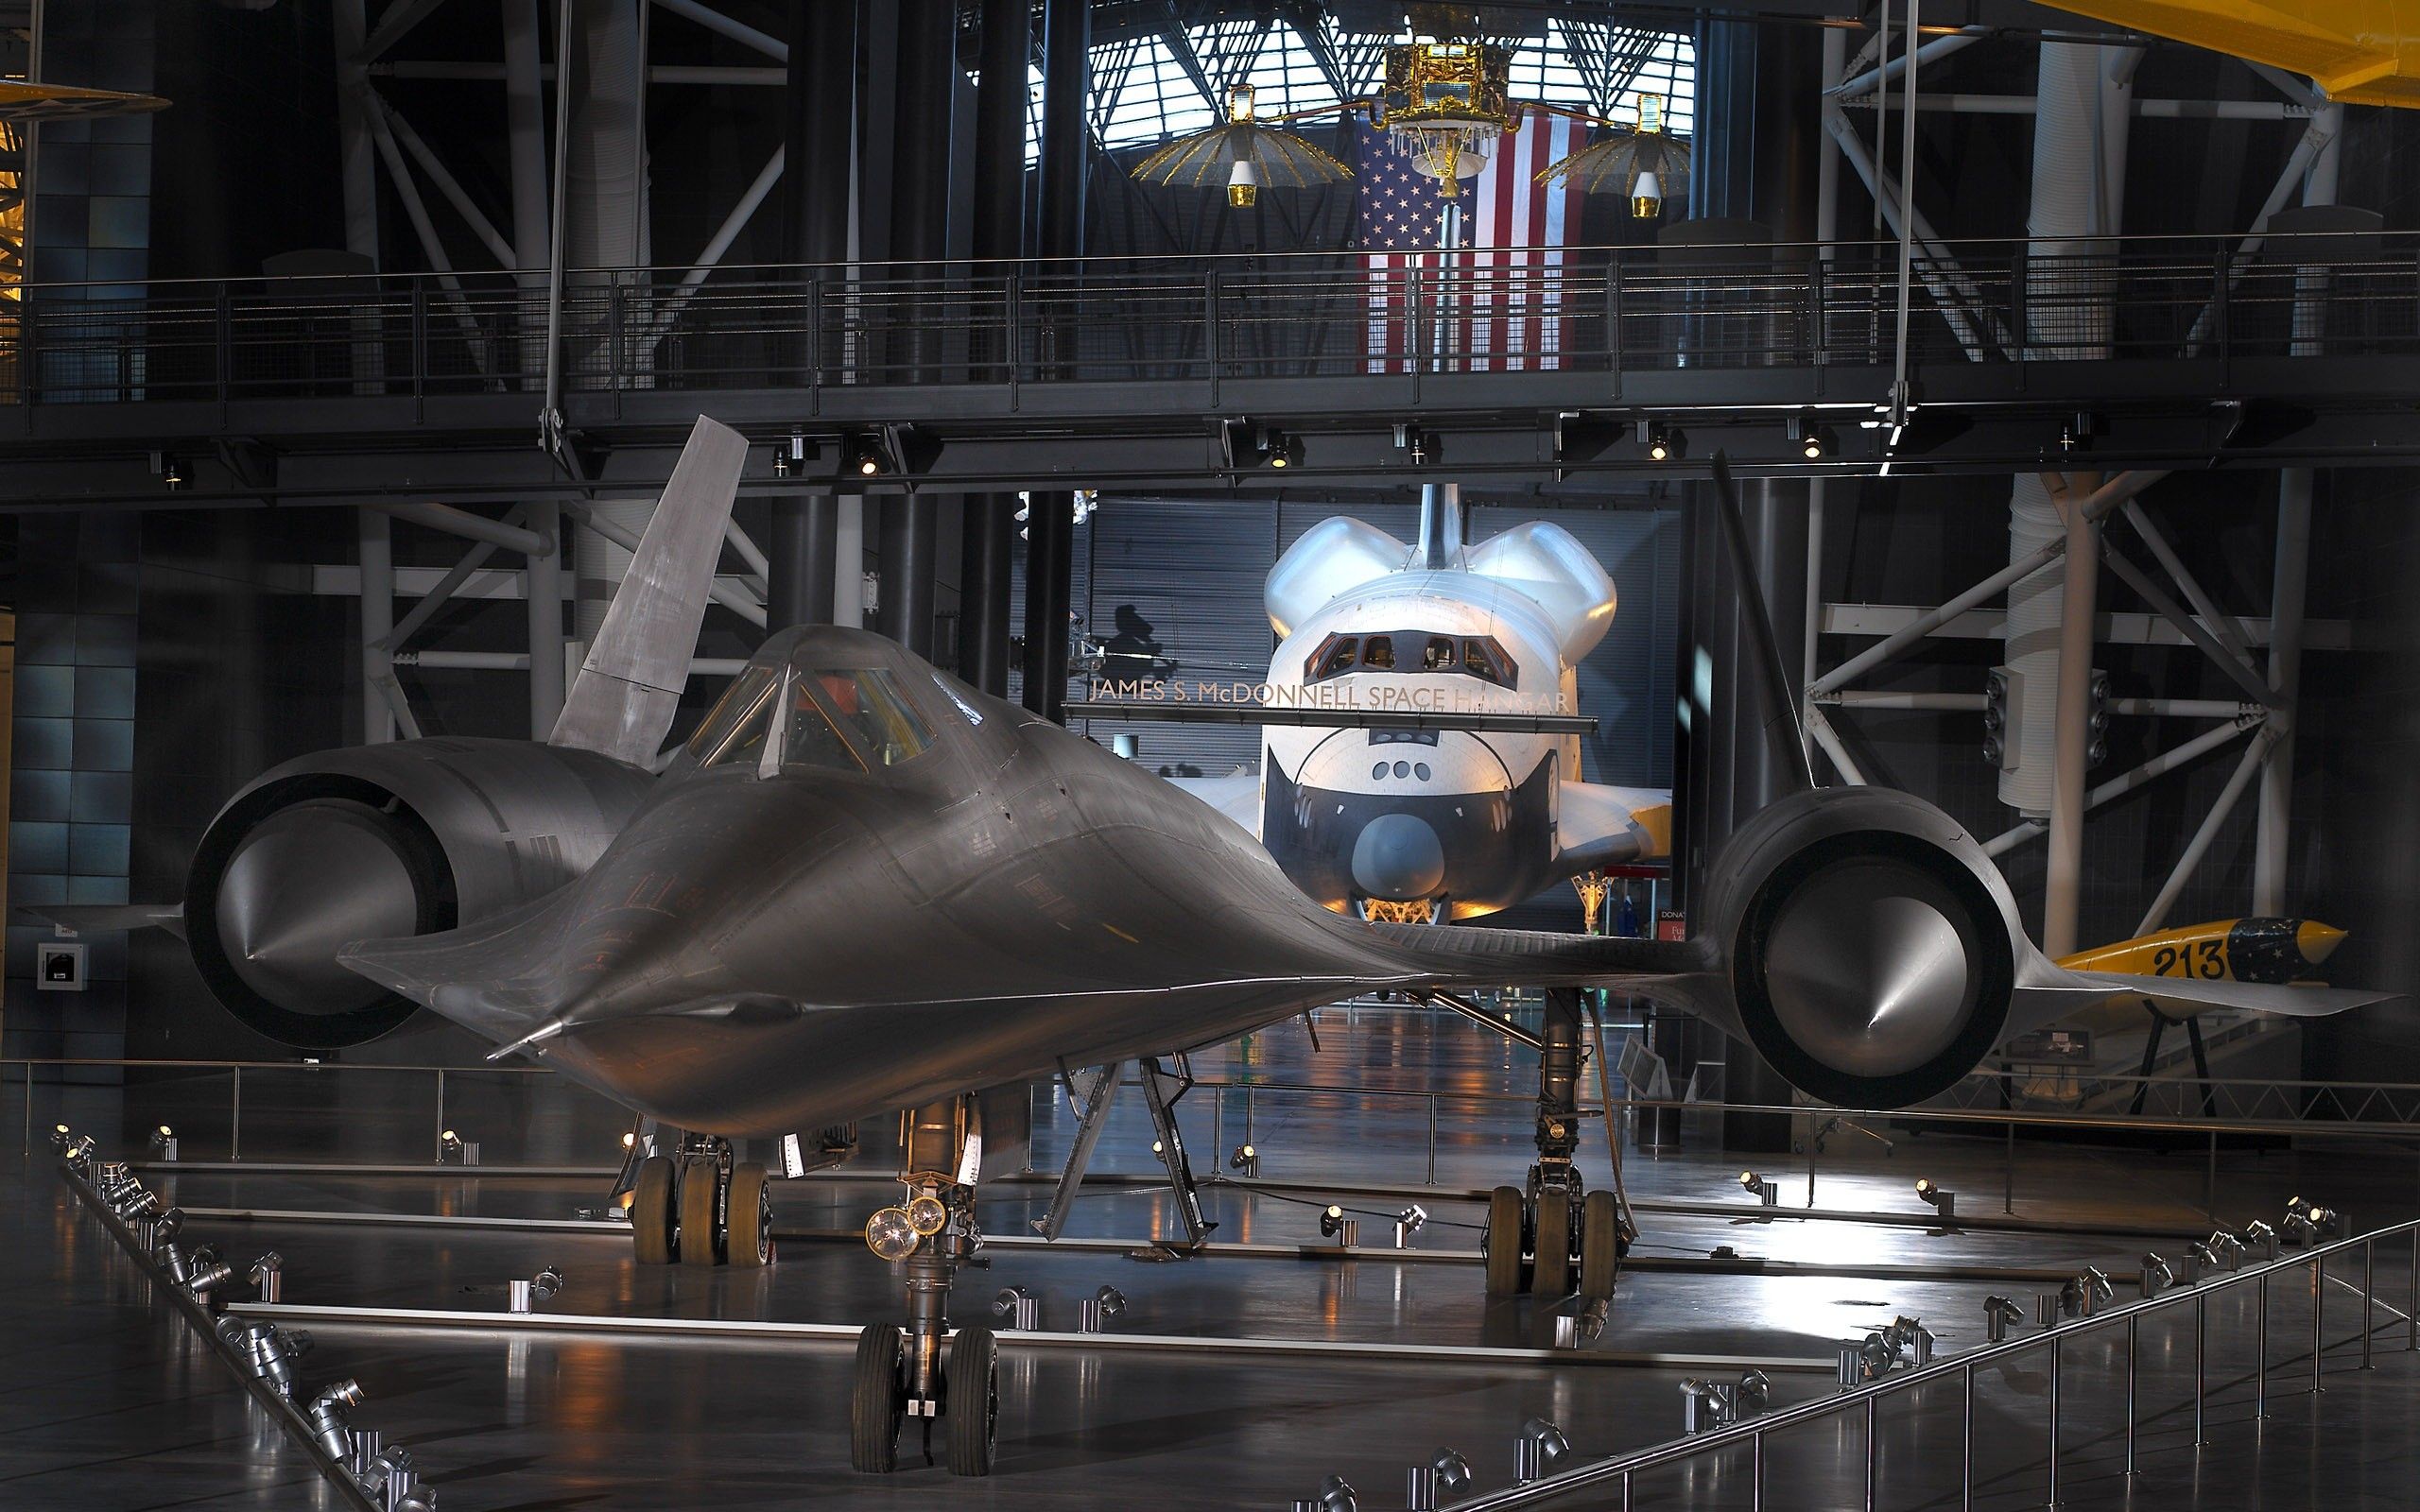 Download Wallpaper Sr 71 Blackbird Shuttle Discovery Lockheed, 2560x Smithsonian National Air And Space Museum